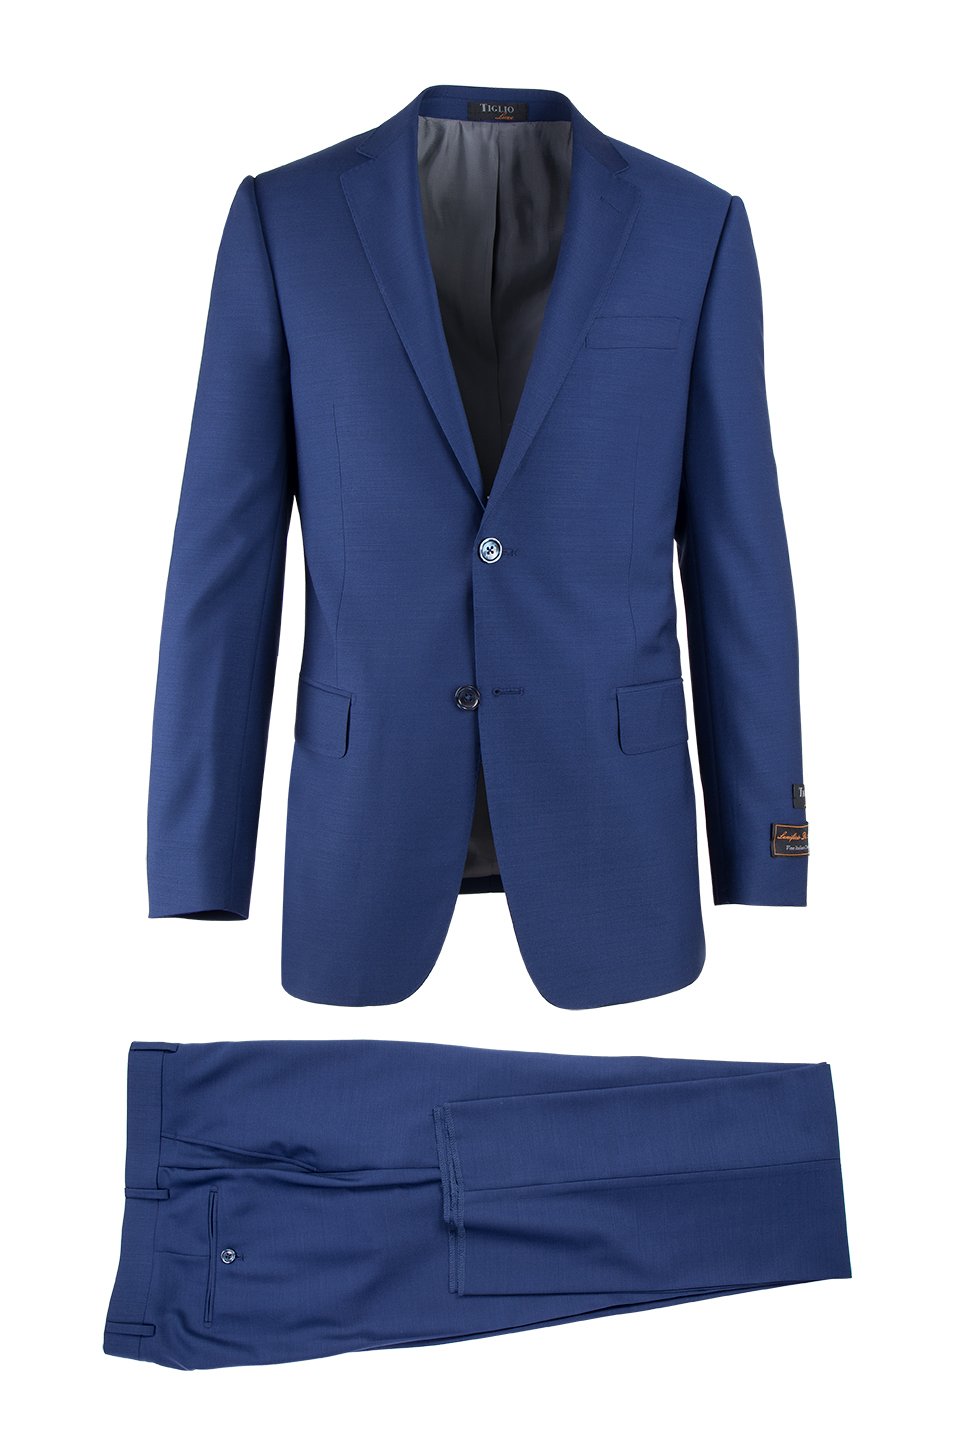 Tiglio Luxe, Novello FBlue, Modern Fit, Pure Wool Suit | LASuitGuy